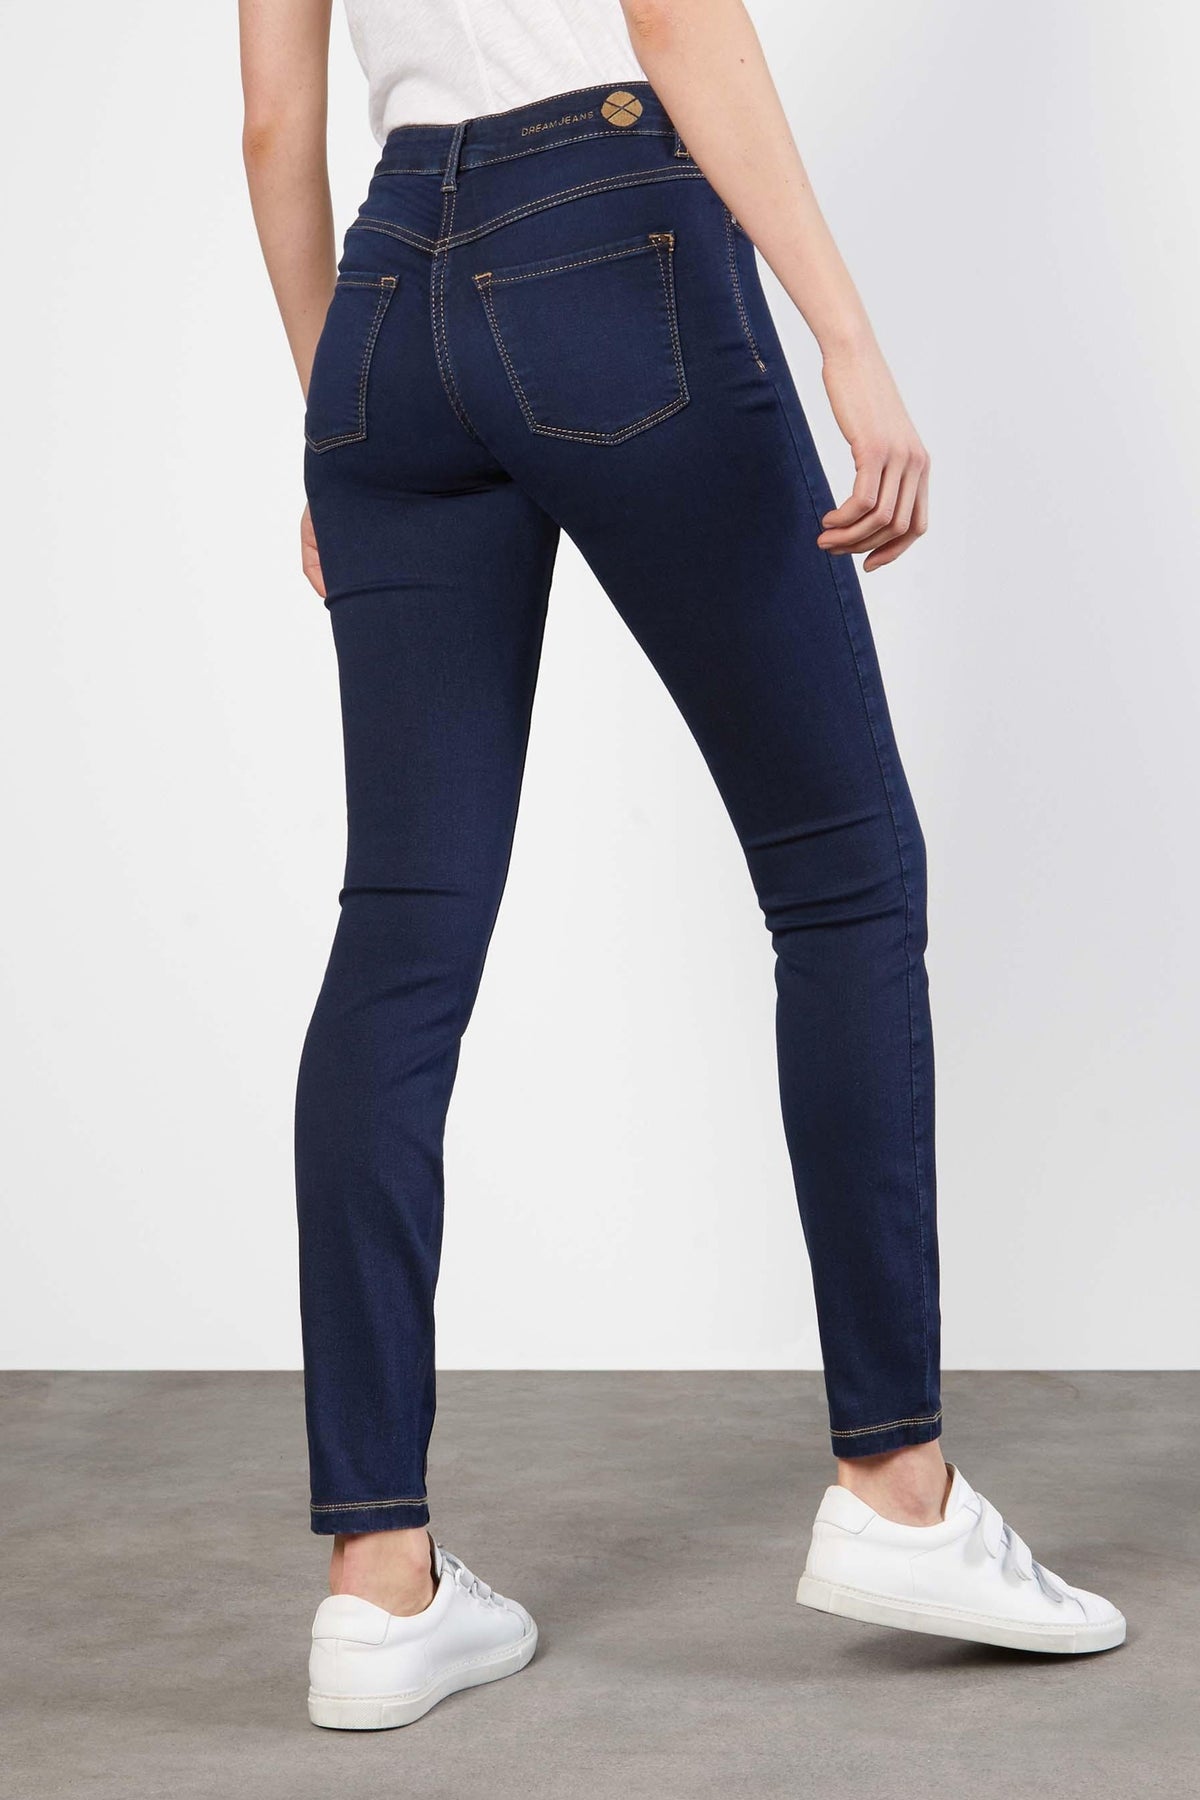 Mac Jeans – Touch of Class Fashions